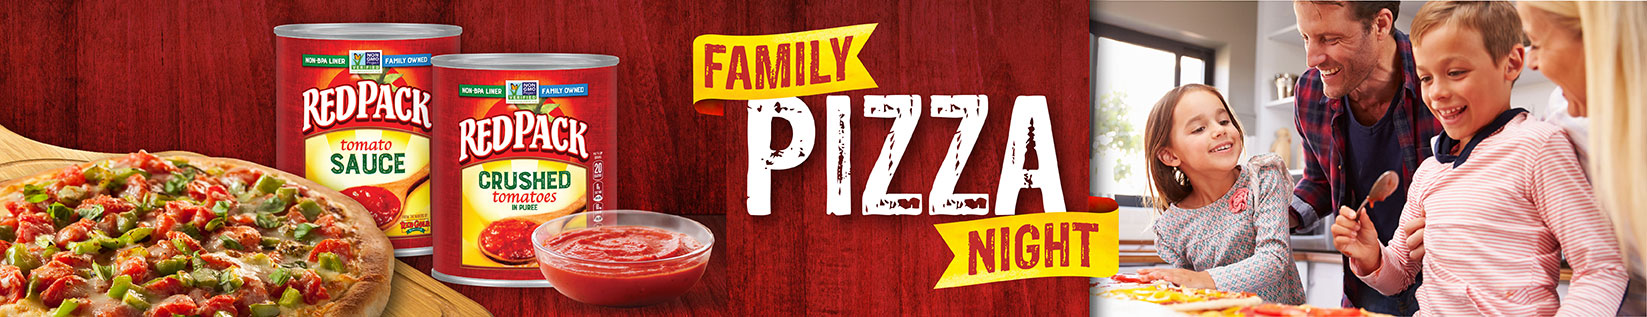 Image of Redpack tomatoes and pizza with family making a pizza